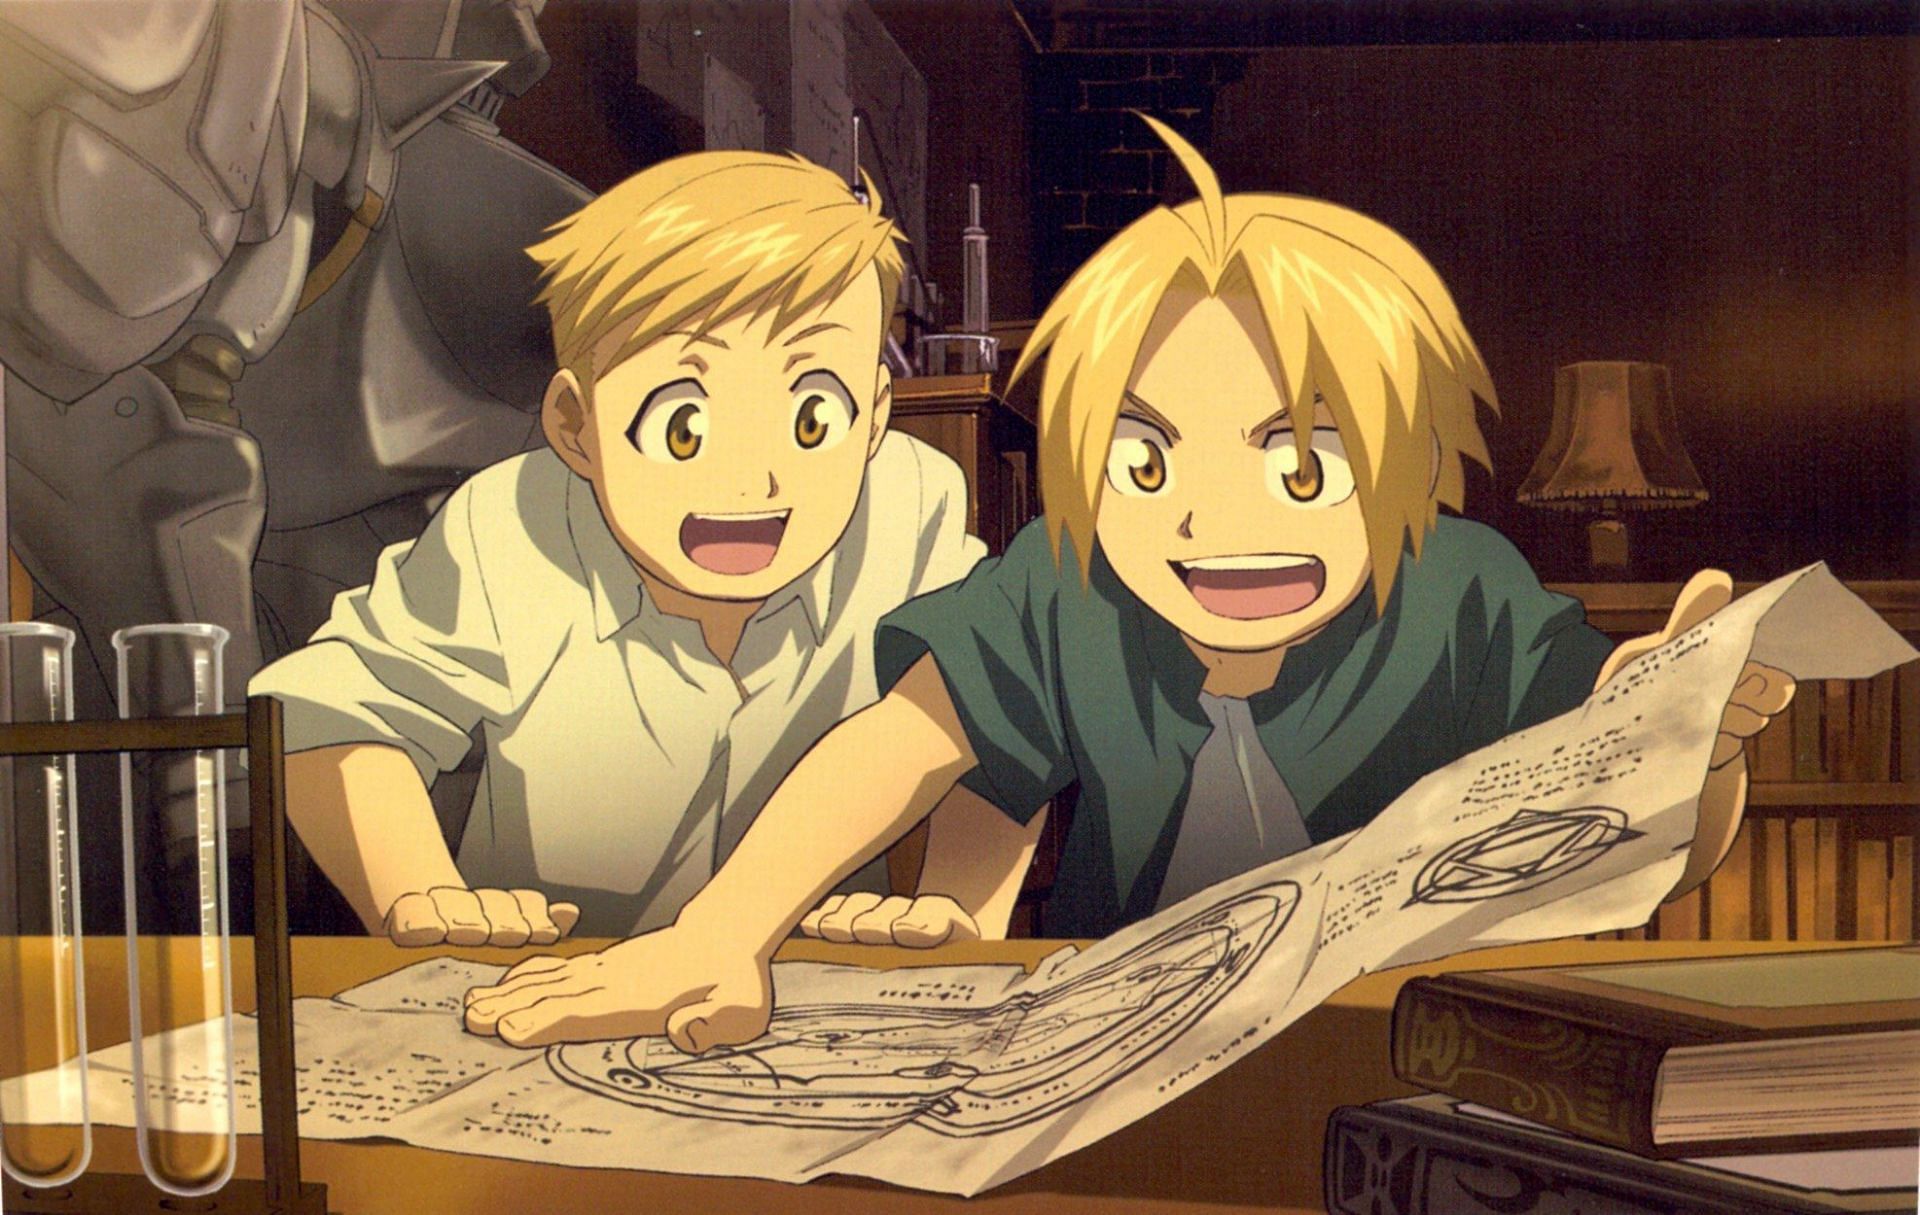 How to Watch 'Fullmetal Alchemist' in Chronological Order